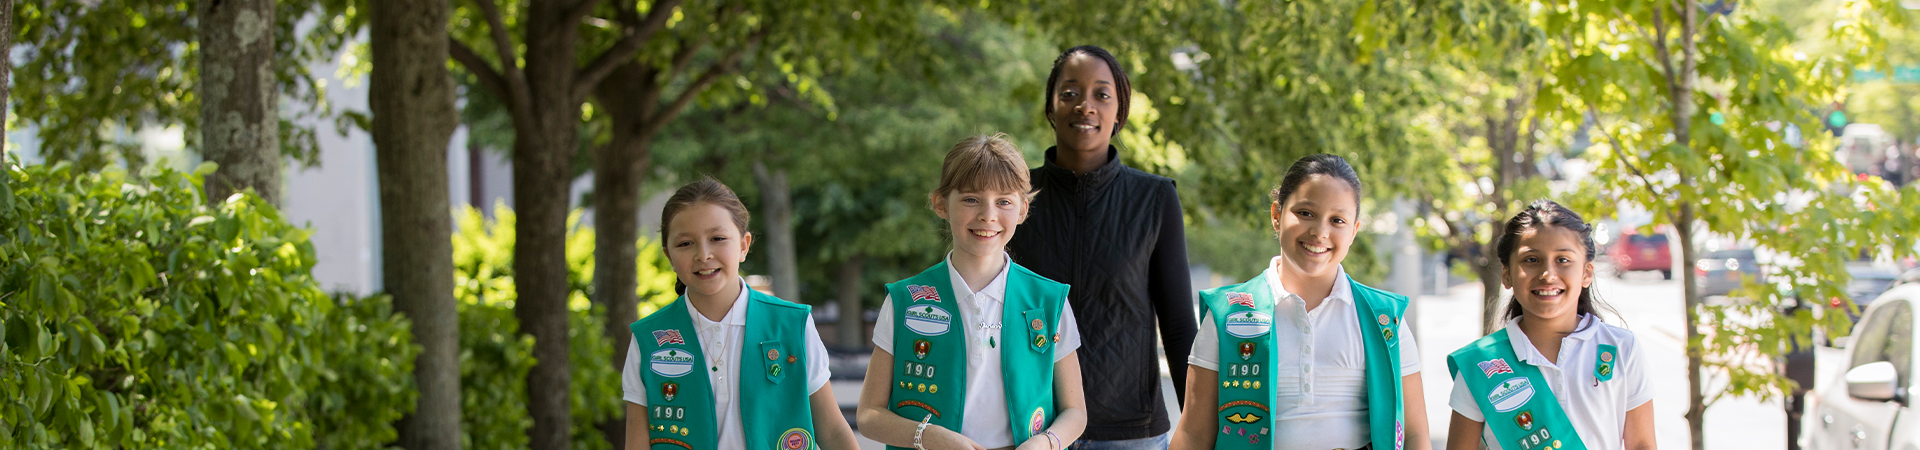  Girl Scout volunteer and Junior Girl Scouts walking outside 